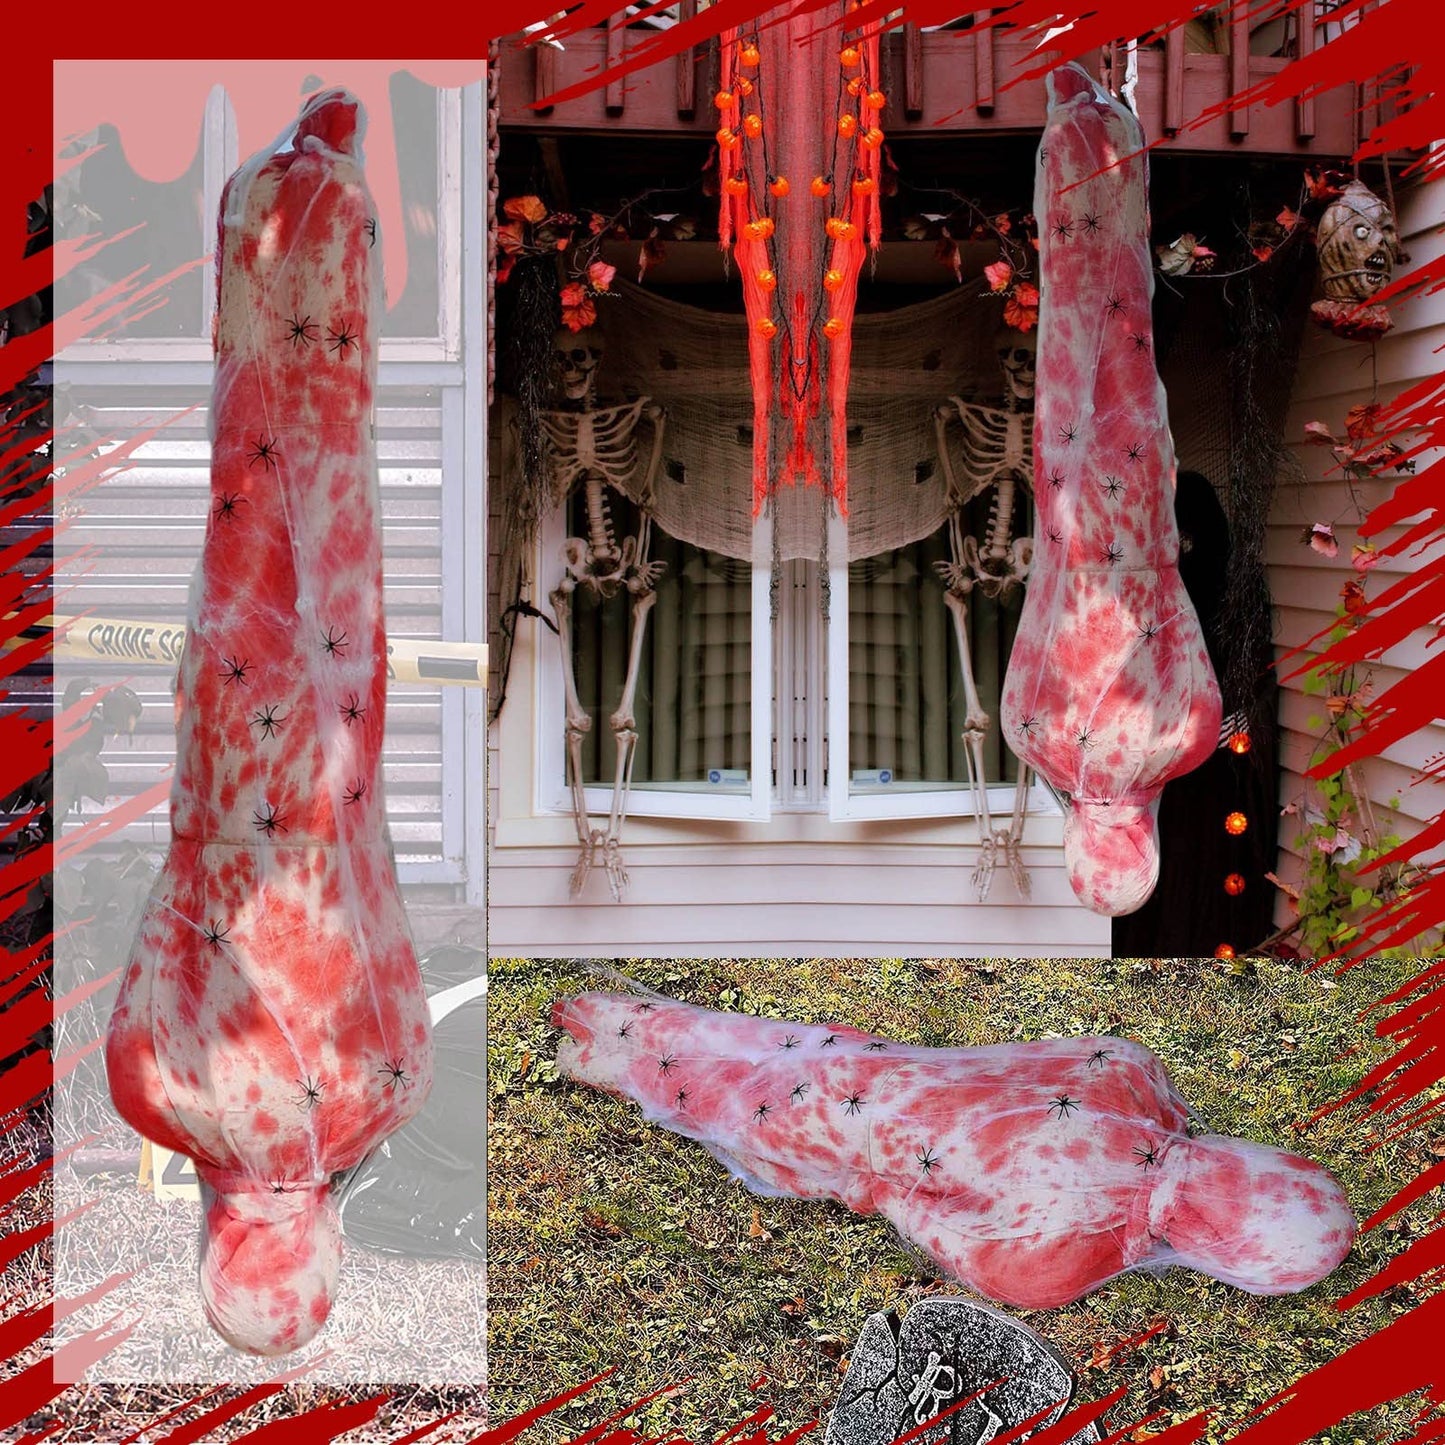 59inch Halloween Corpse Props Set Outdoor Yard Creepy Shroud Decoration Horror Bloody Body Bag Haunted House Hanging Decorations